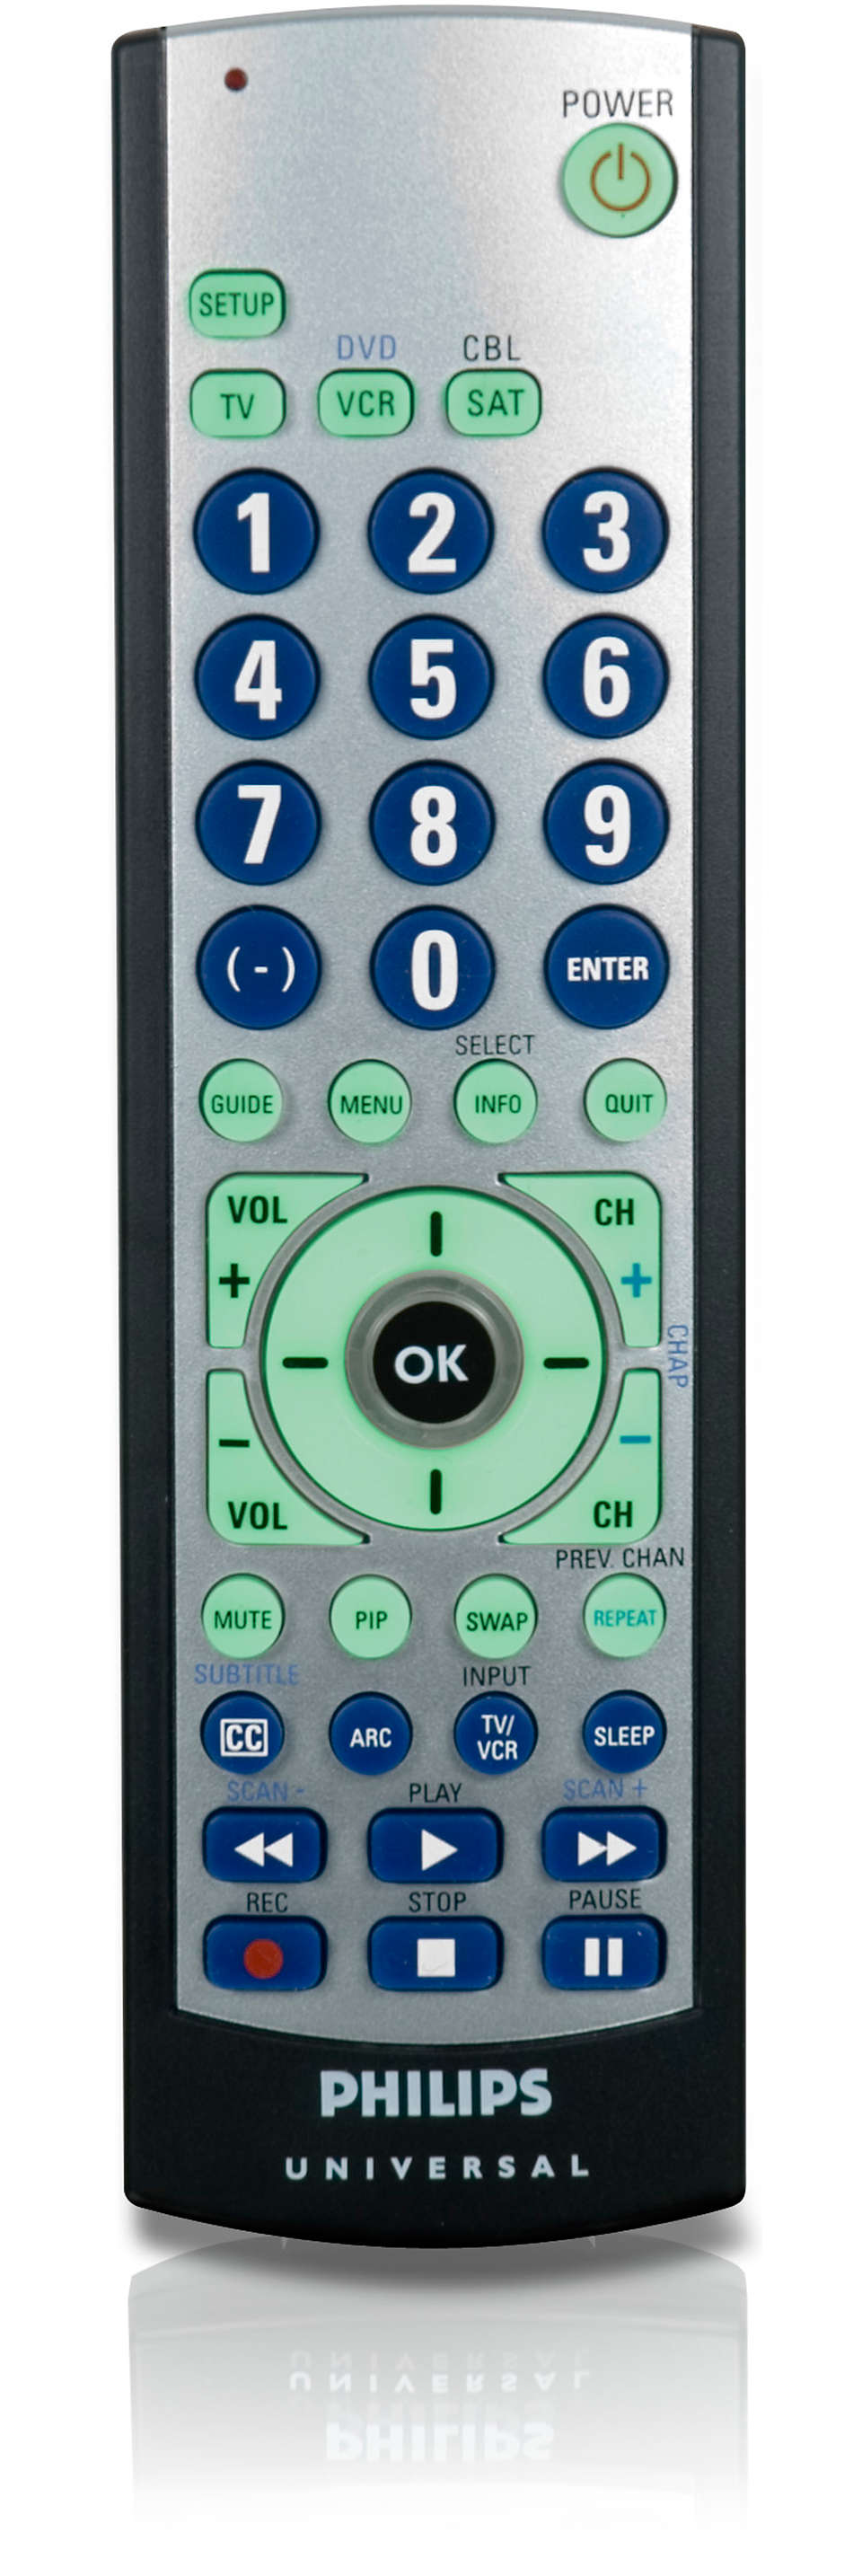 Perfect replacement for a lost or broken remote.